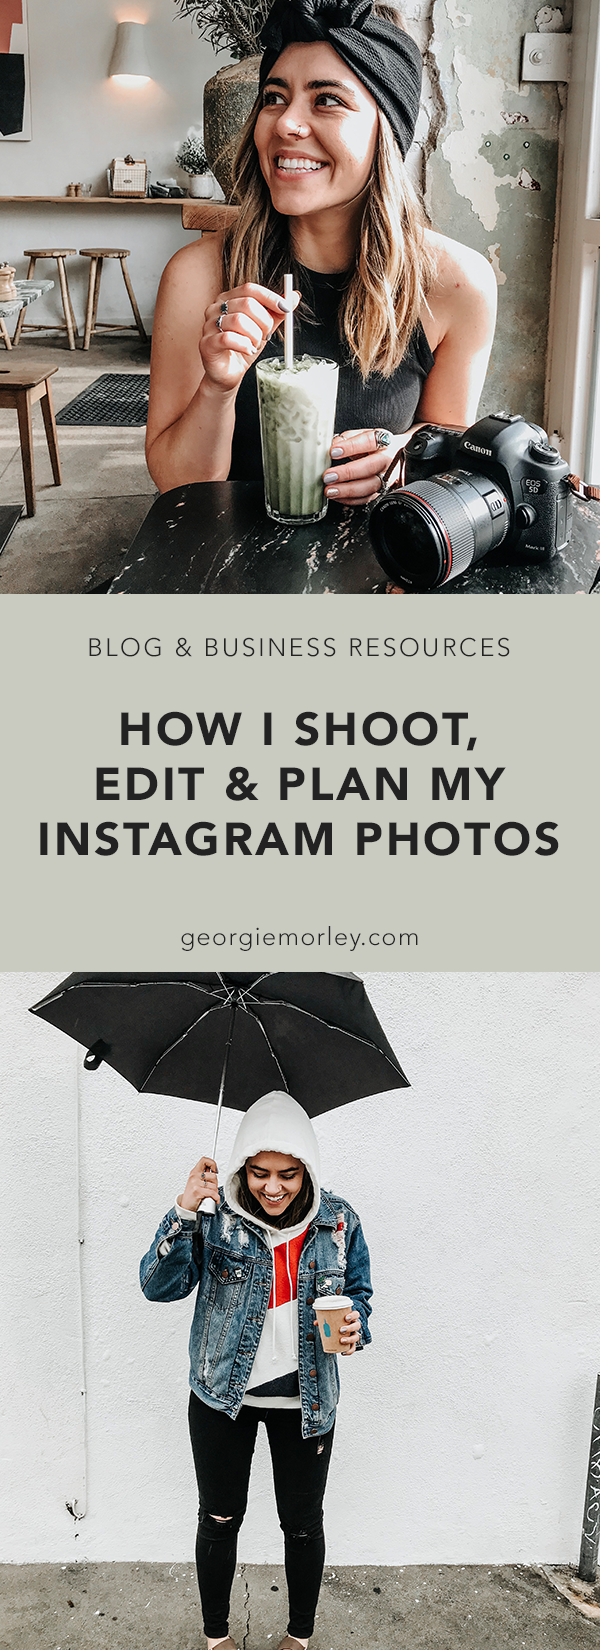 How to Shoot Edit and Plan Instagram Photos